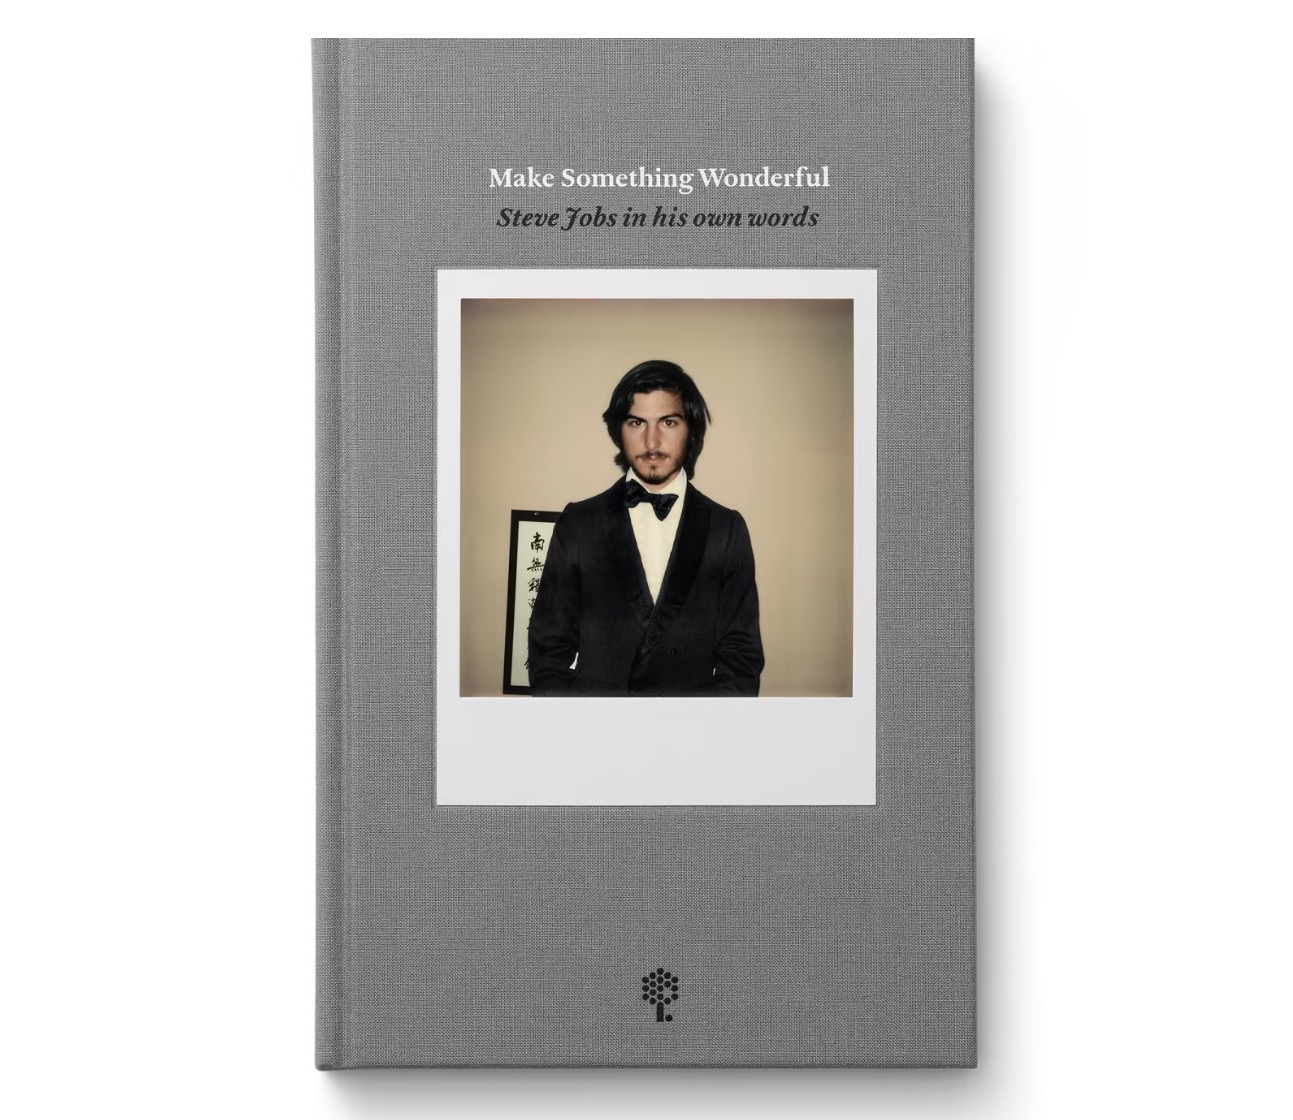 Download the Free Steve Jobs Archive Book, “Make Something ...